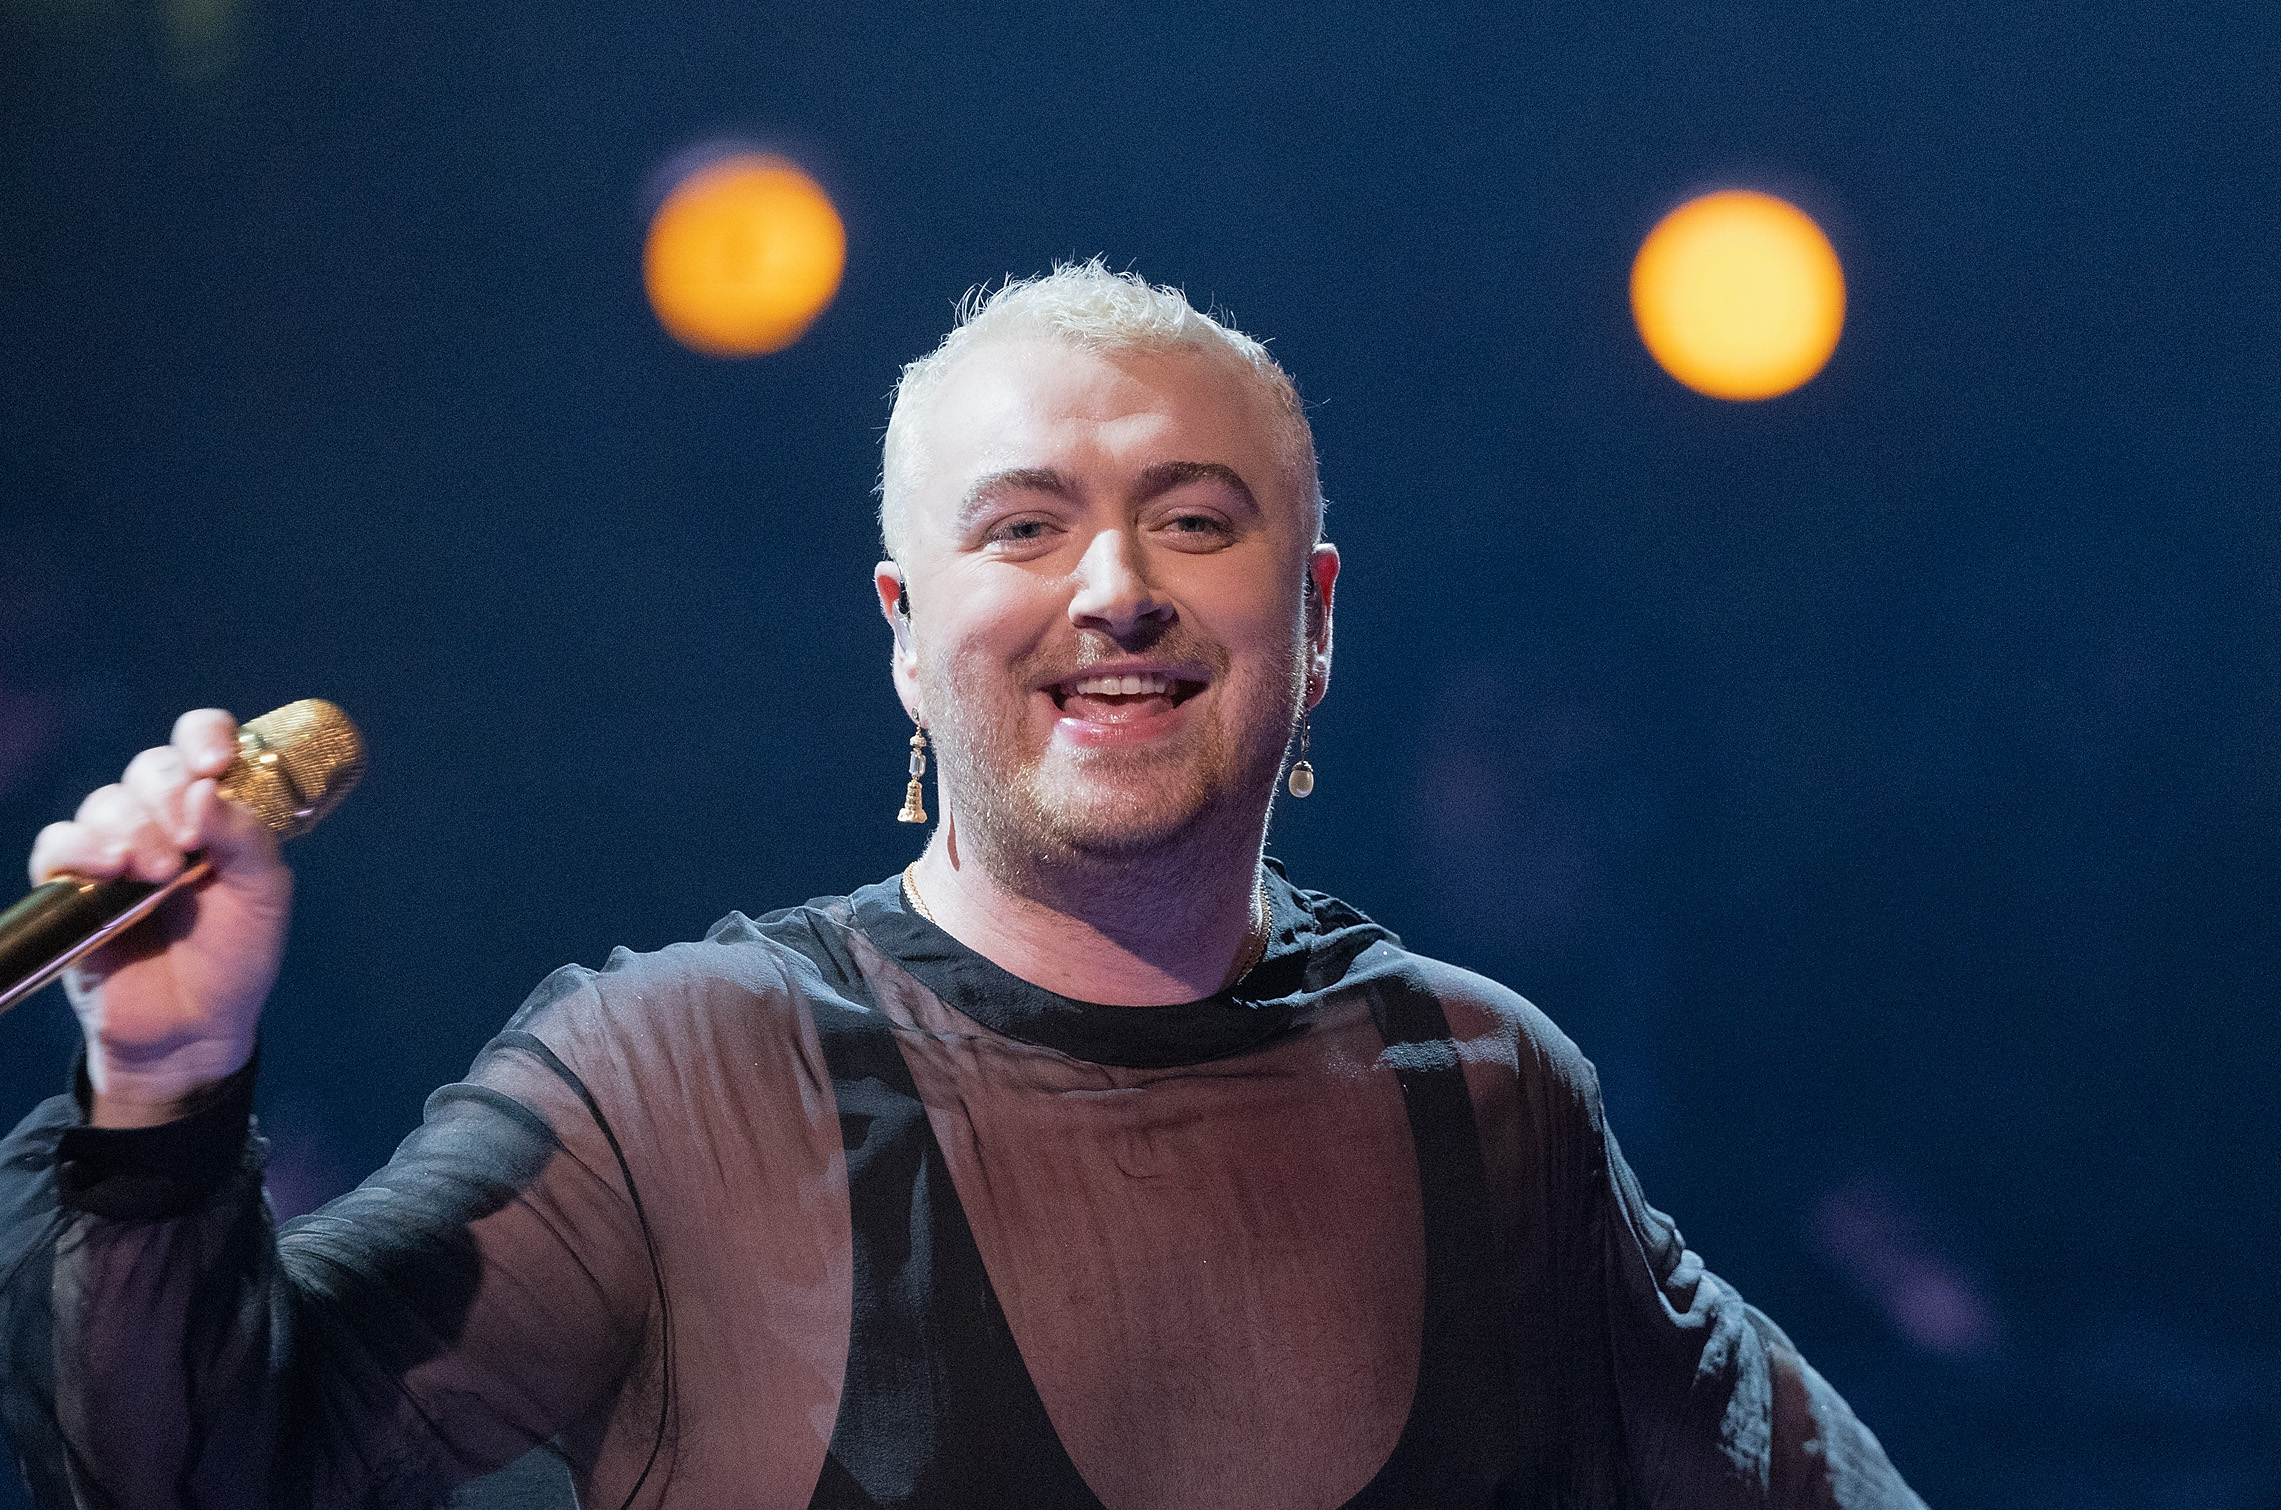 Sam Smith Slammed For ‘Satanic,’ Overtly Sexual Performance With No Age Restrictions